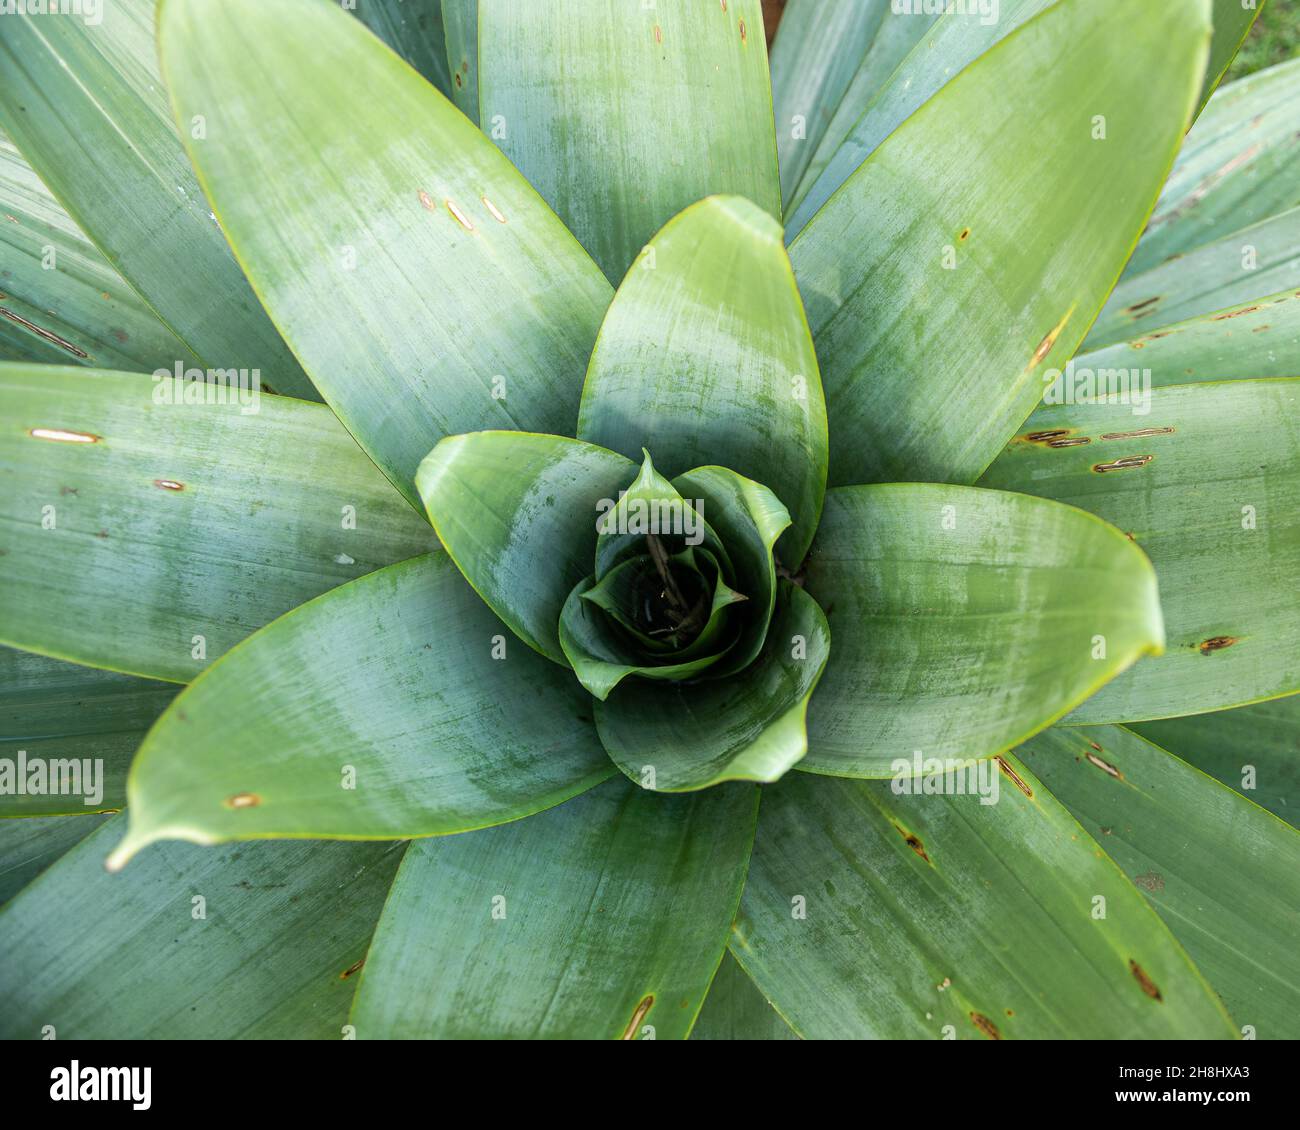 The center cup of a large Vriesea tropical bromeliad forming a phytotelmata where insects develop part of their life-cycles, close-up and top view Stock Photo